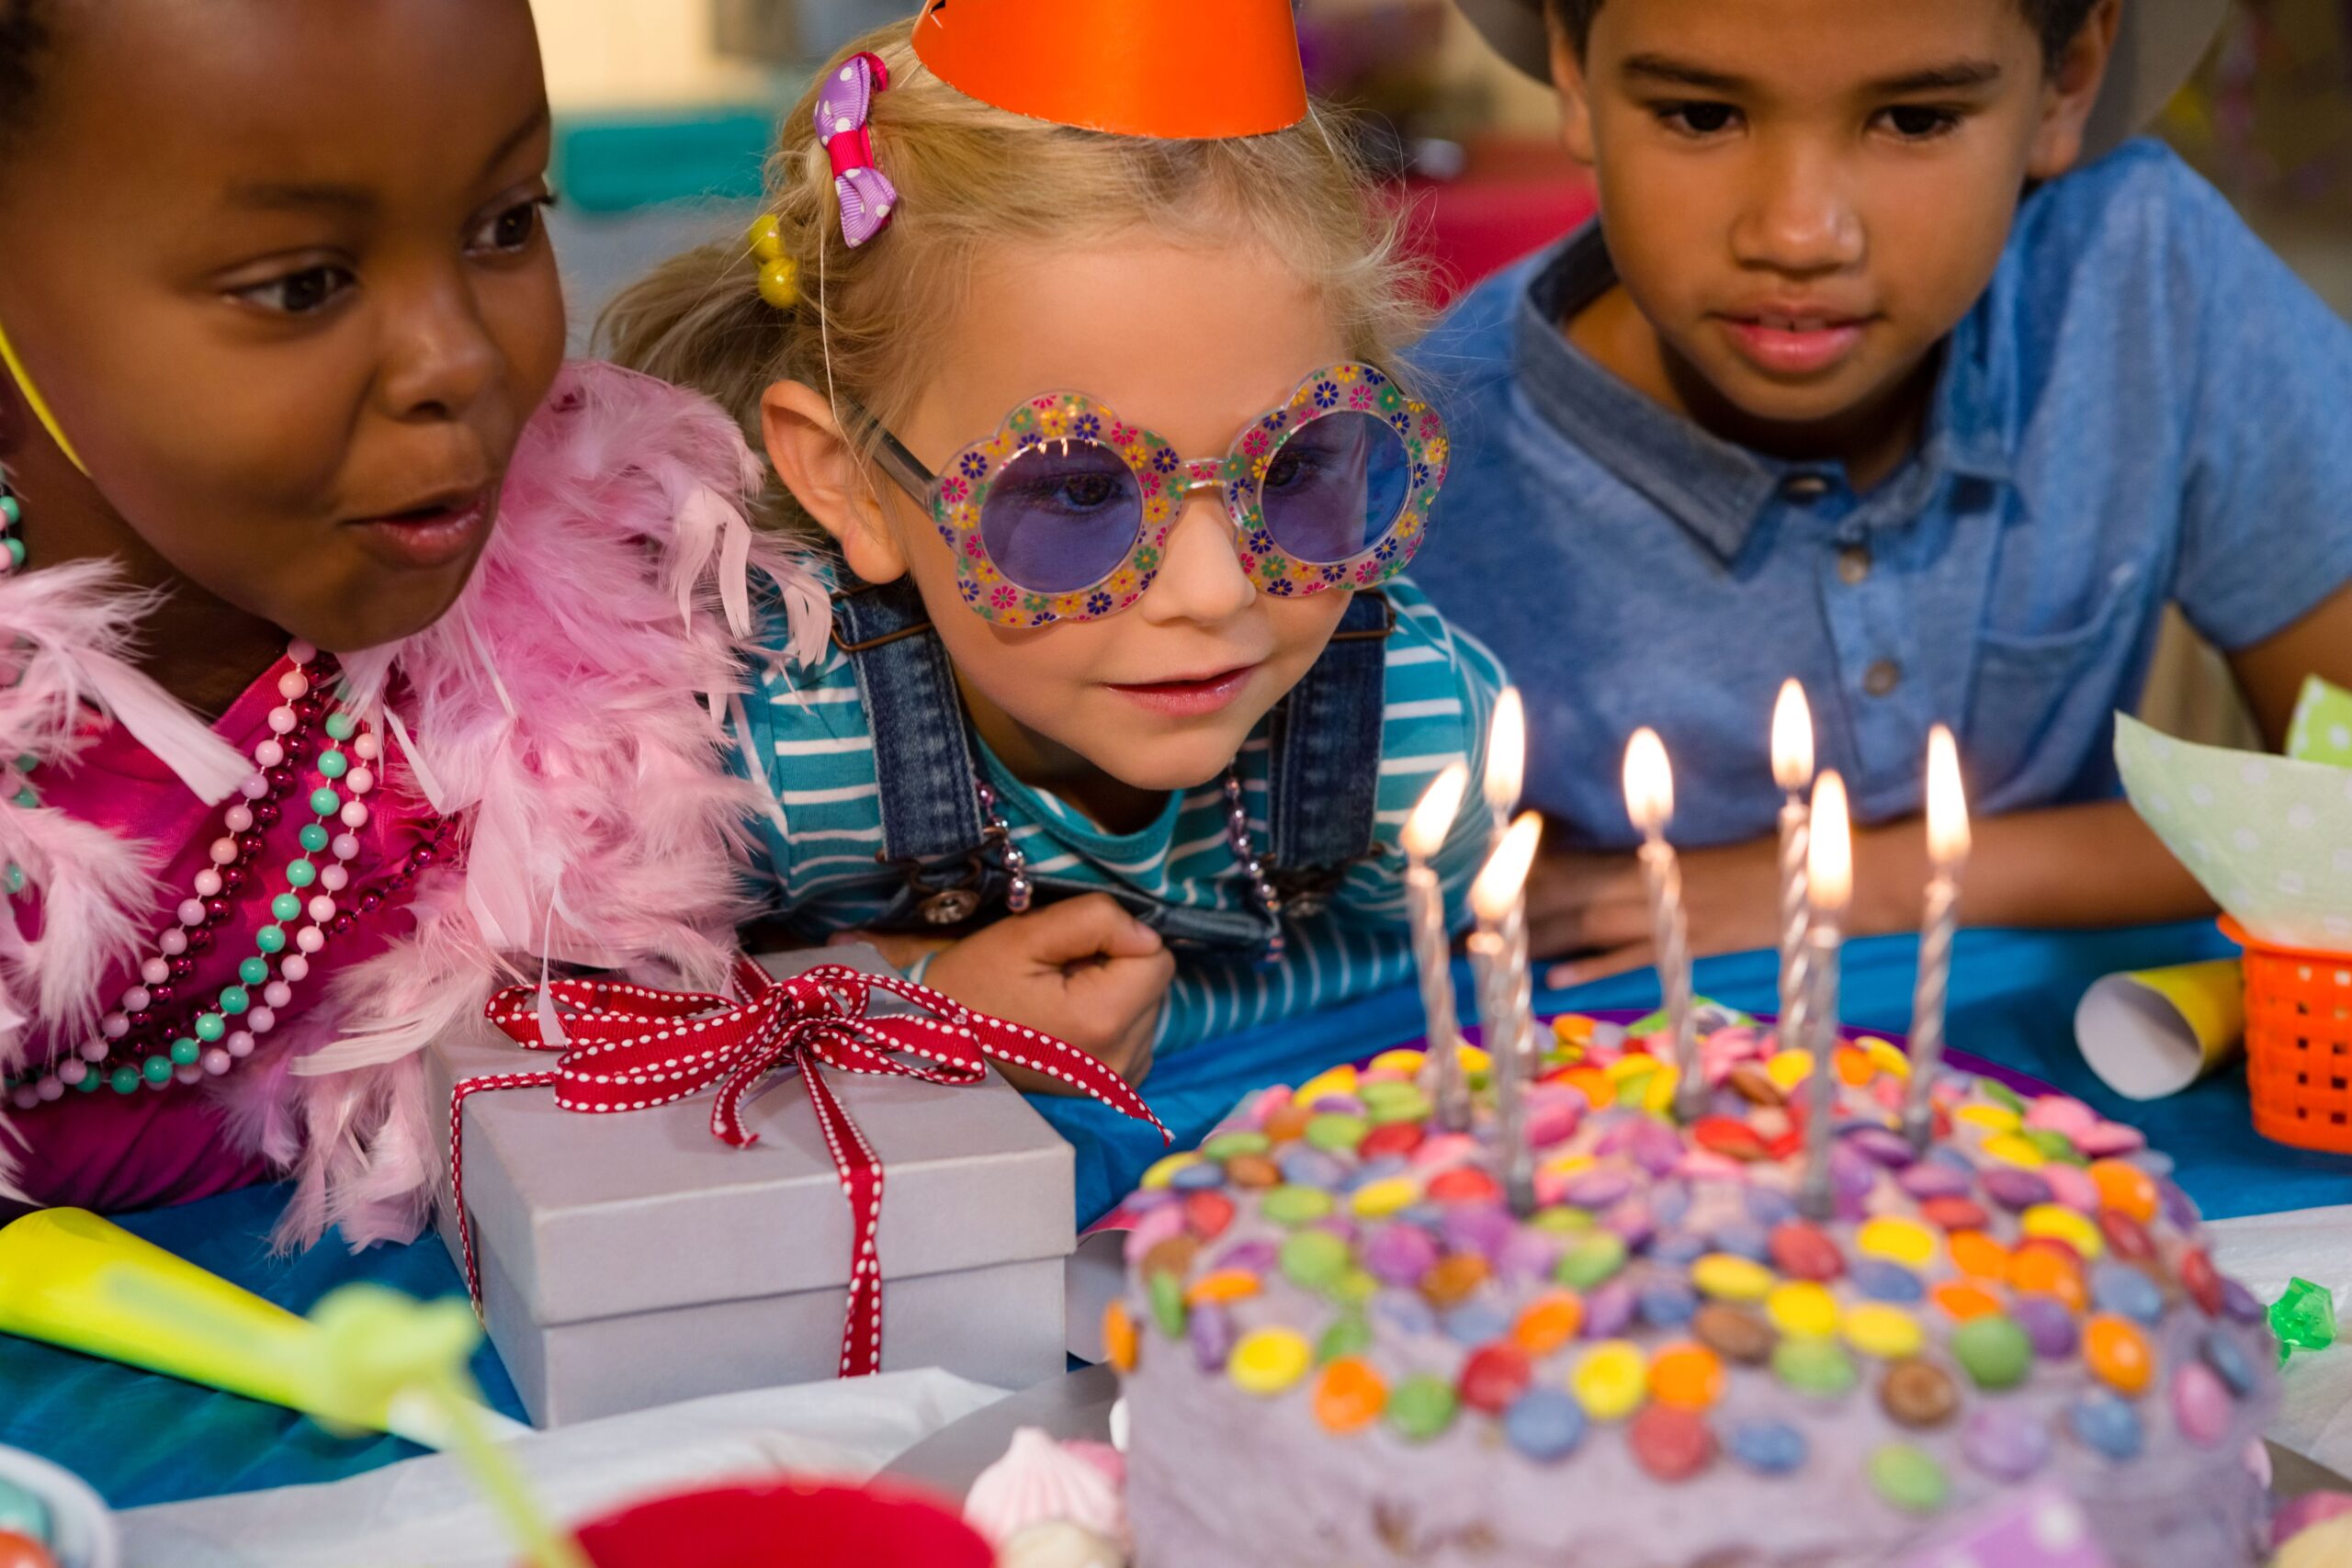 Kids eat Cake at Birthday Party